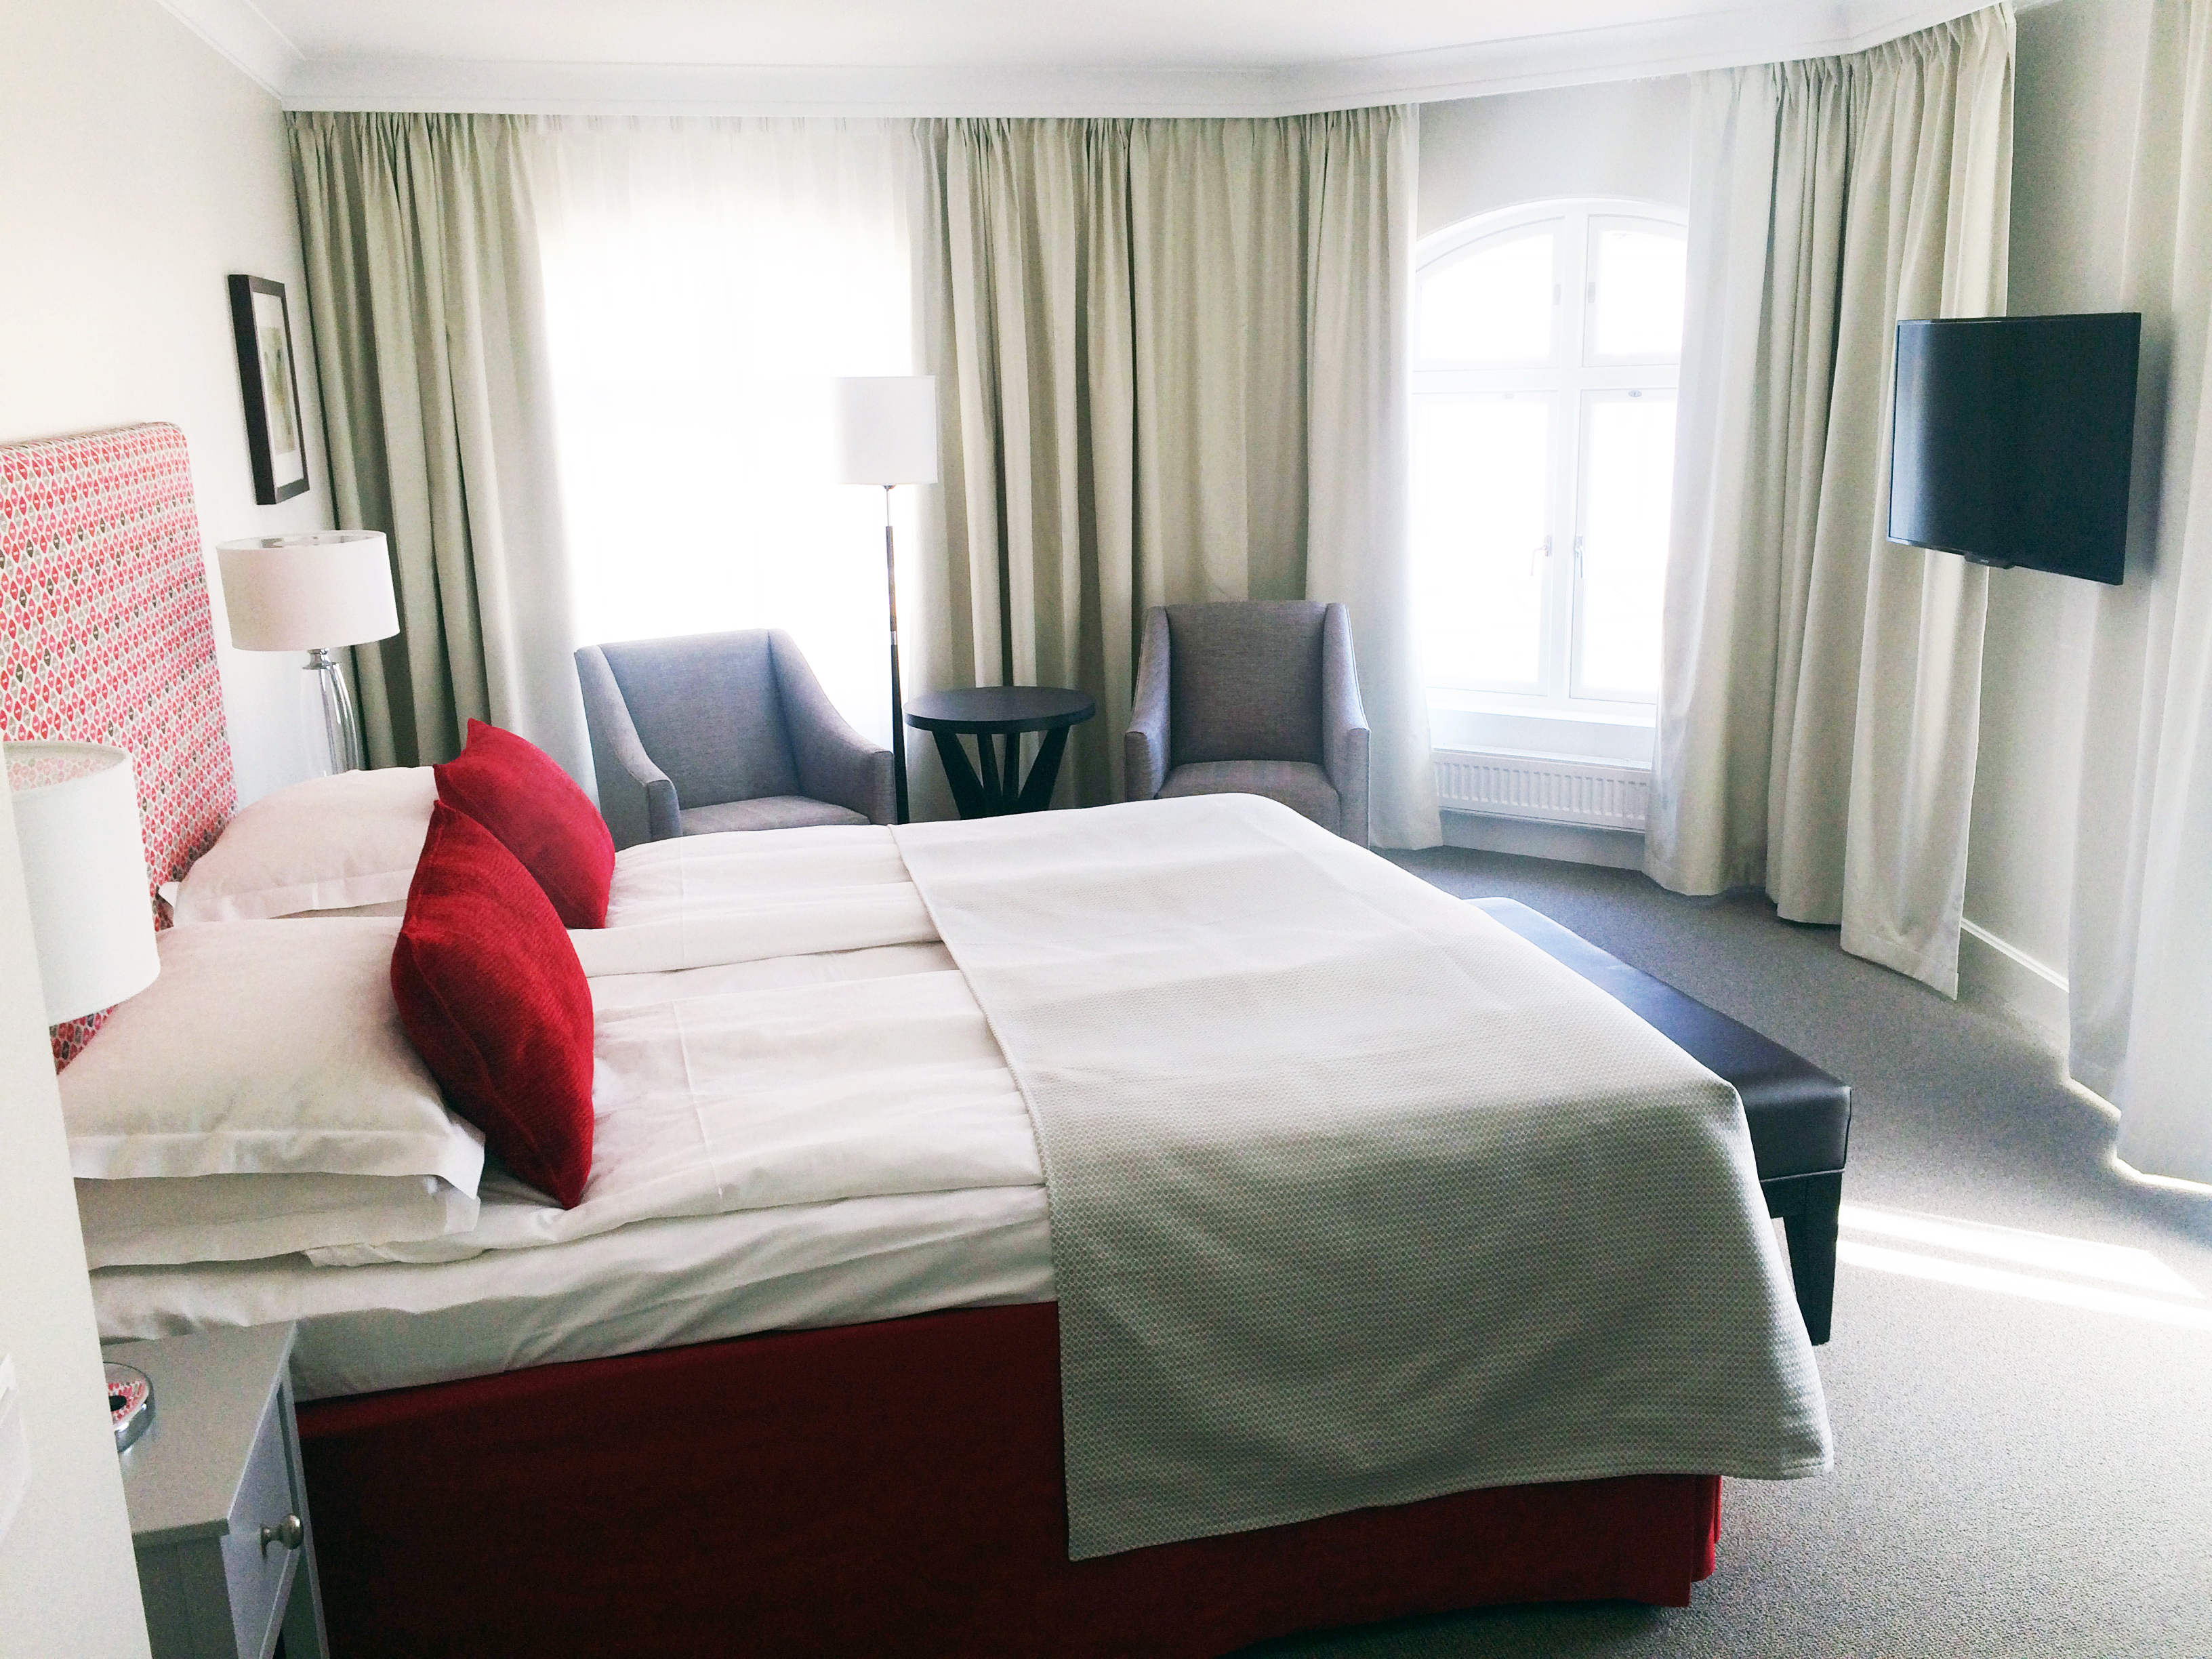 Hotel room with double bed, red headboard and armchairs